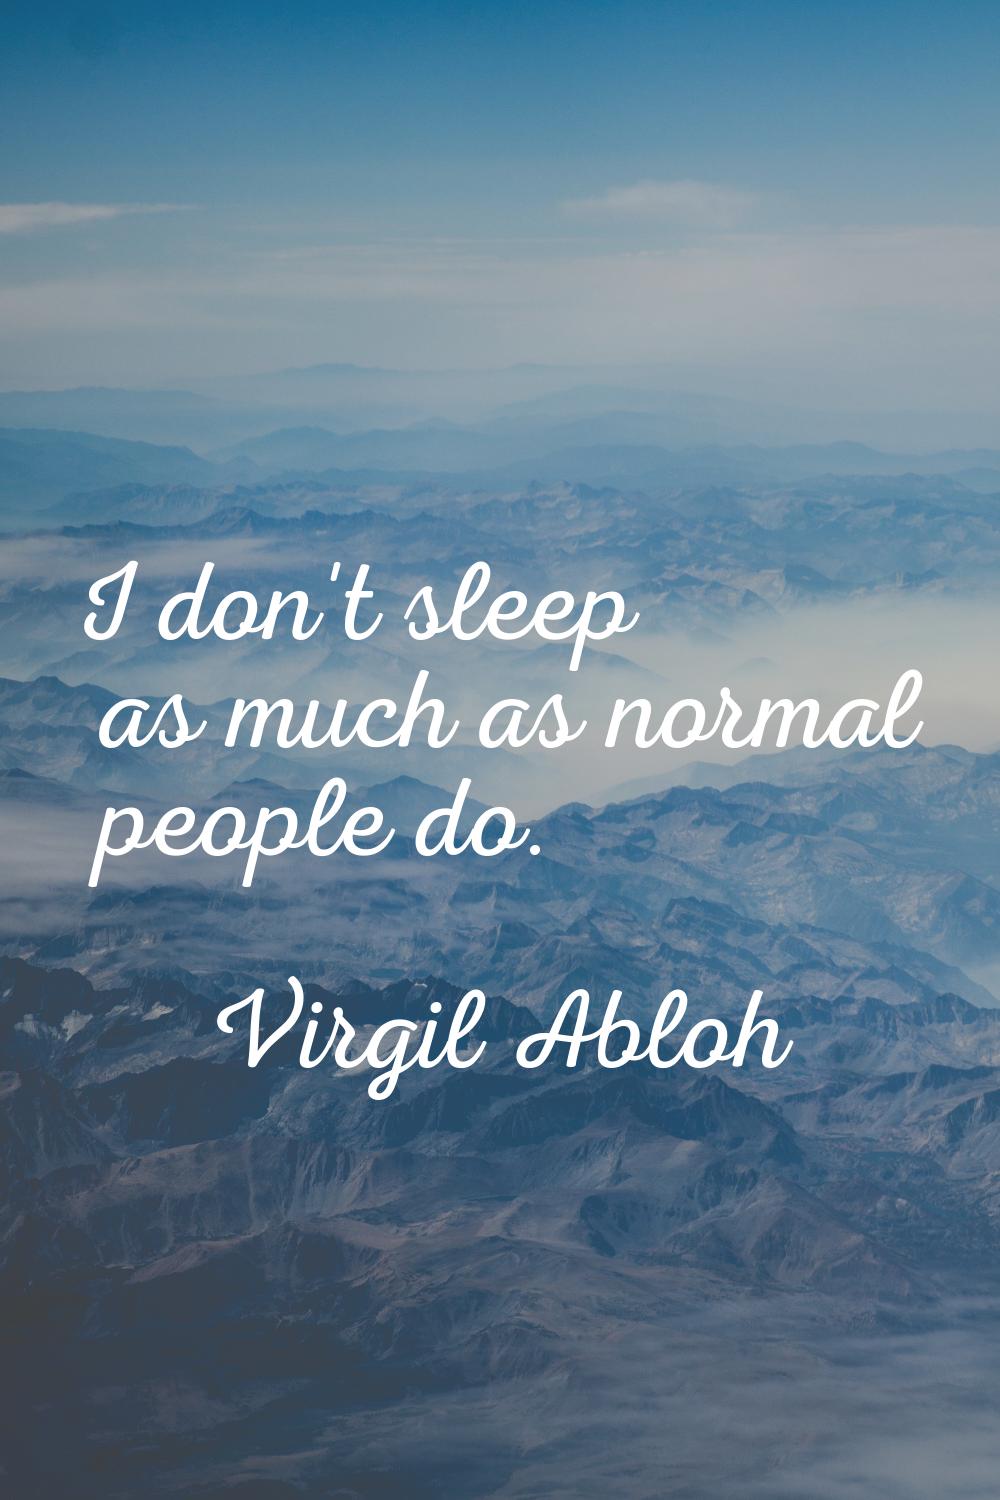 I don't sleep as much as normal people do.